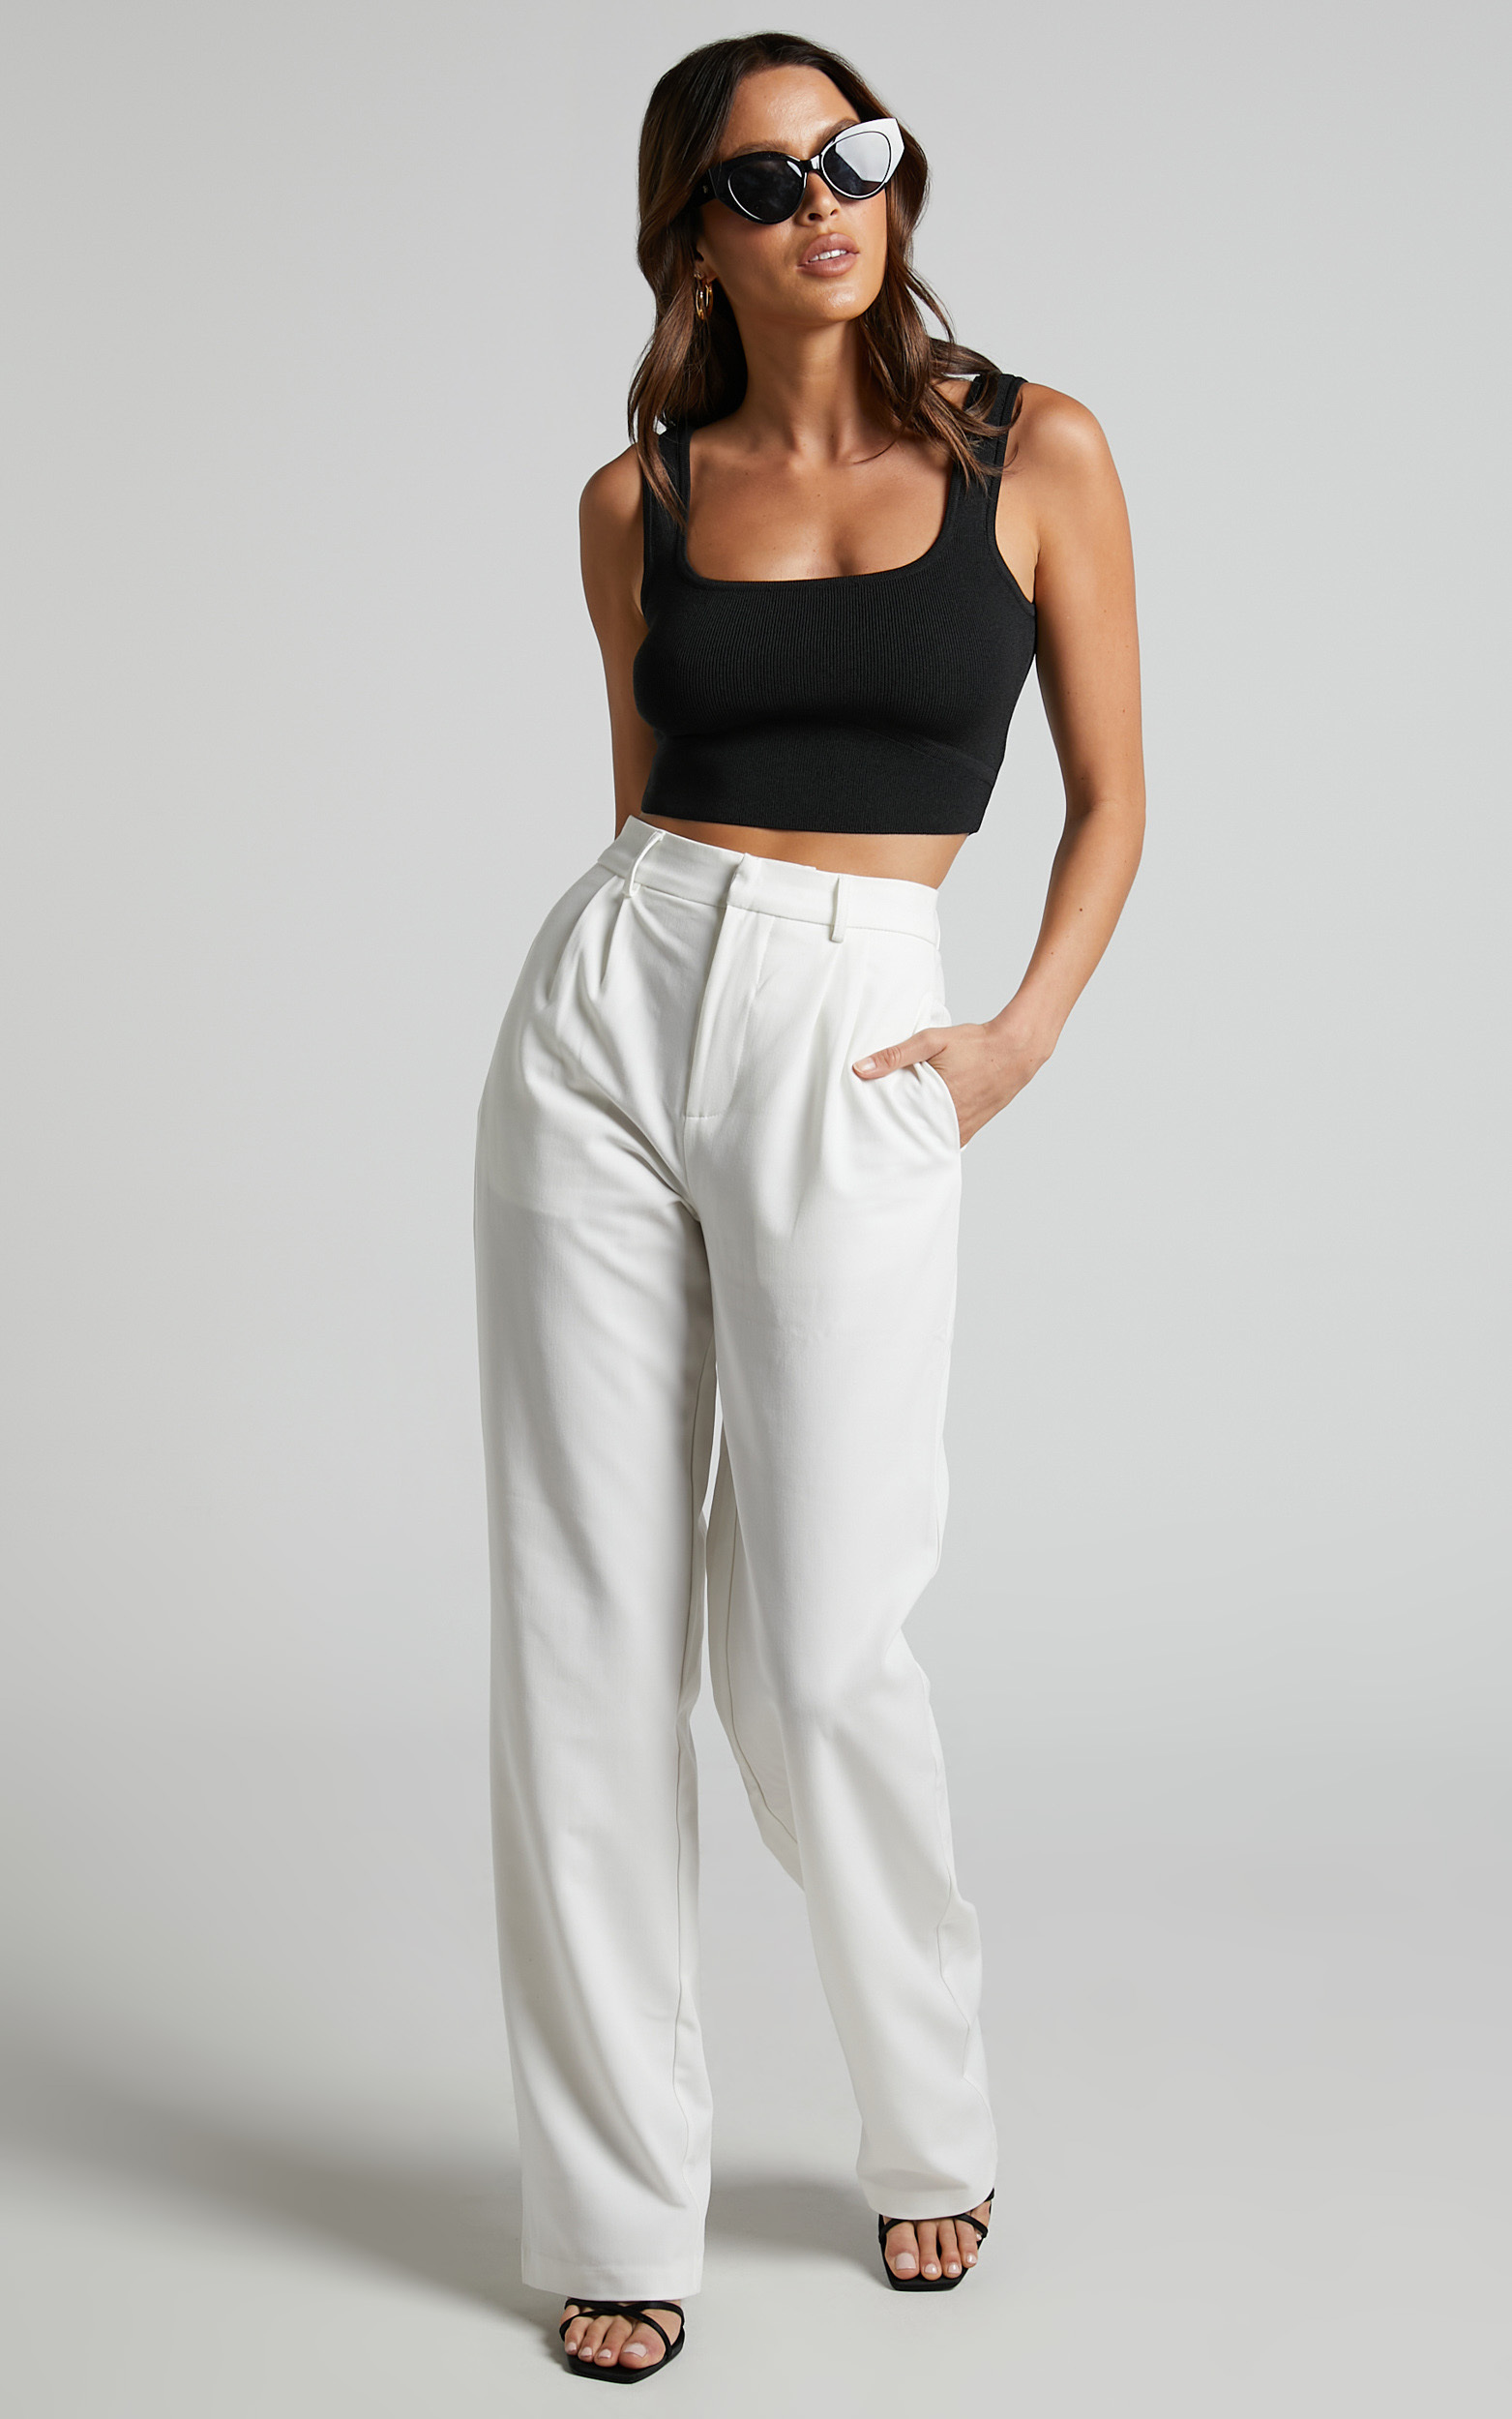 Lorcan Pants - High Waisted Tailored Pants in White - 04, WHT6, hi-res image number null